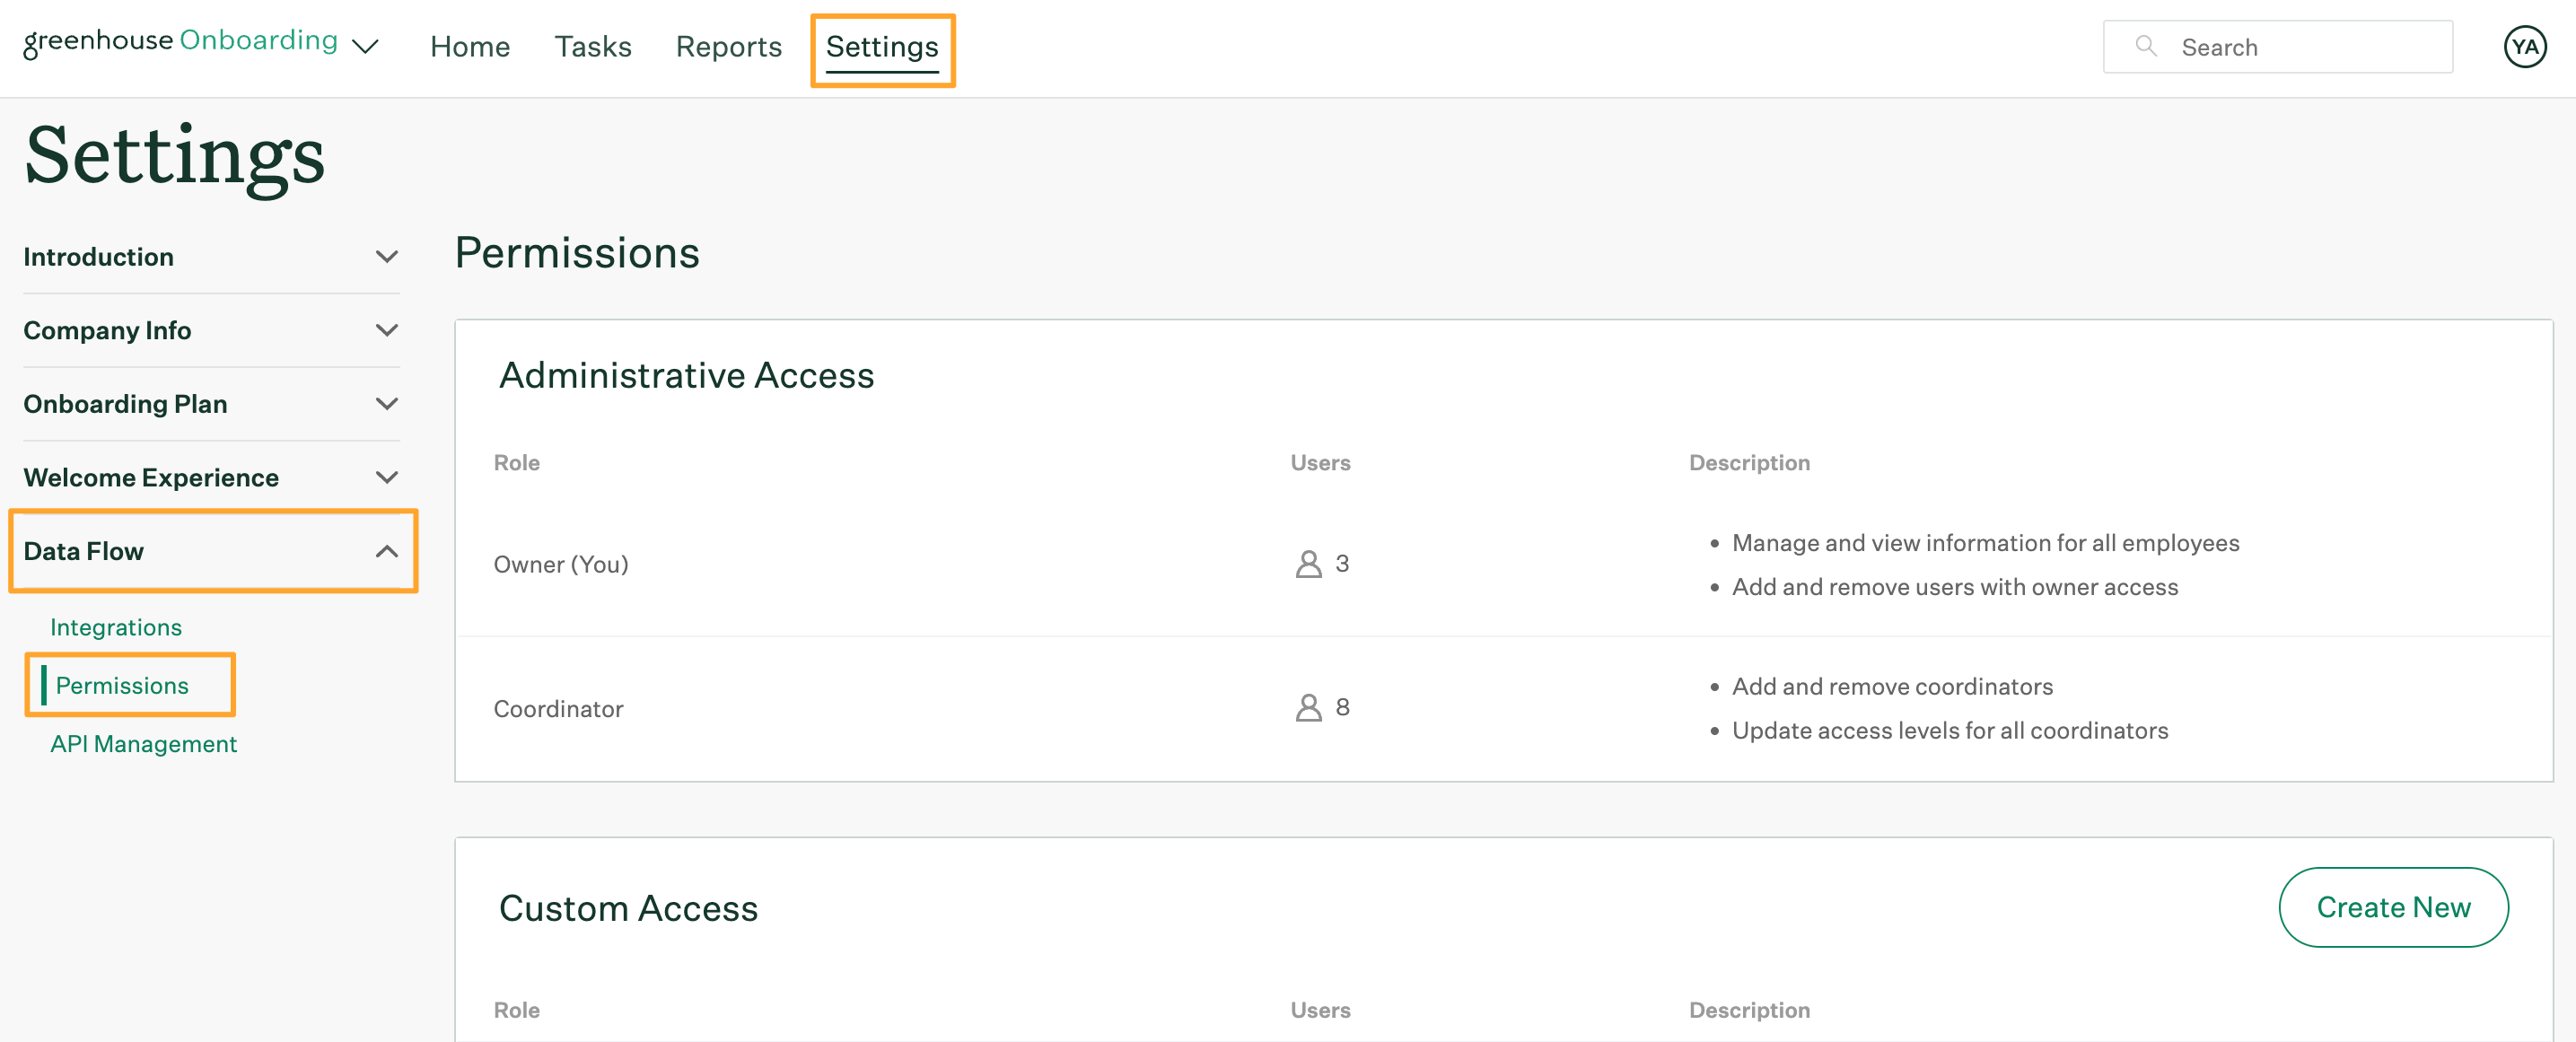 Greenhouse Onboarding permissions page with the settings data flow and permissions tabs highlighted